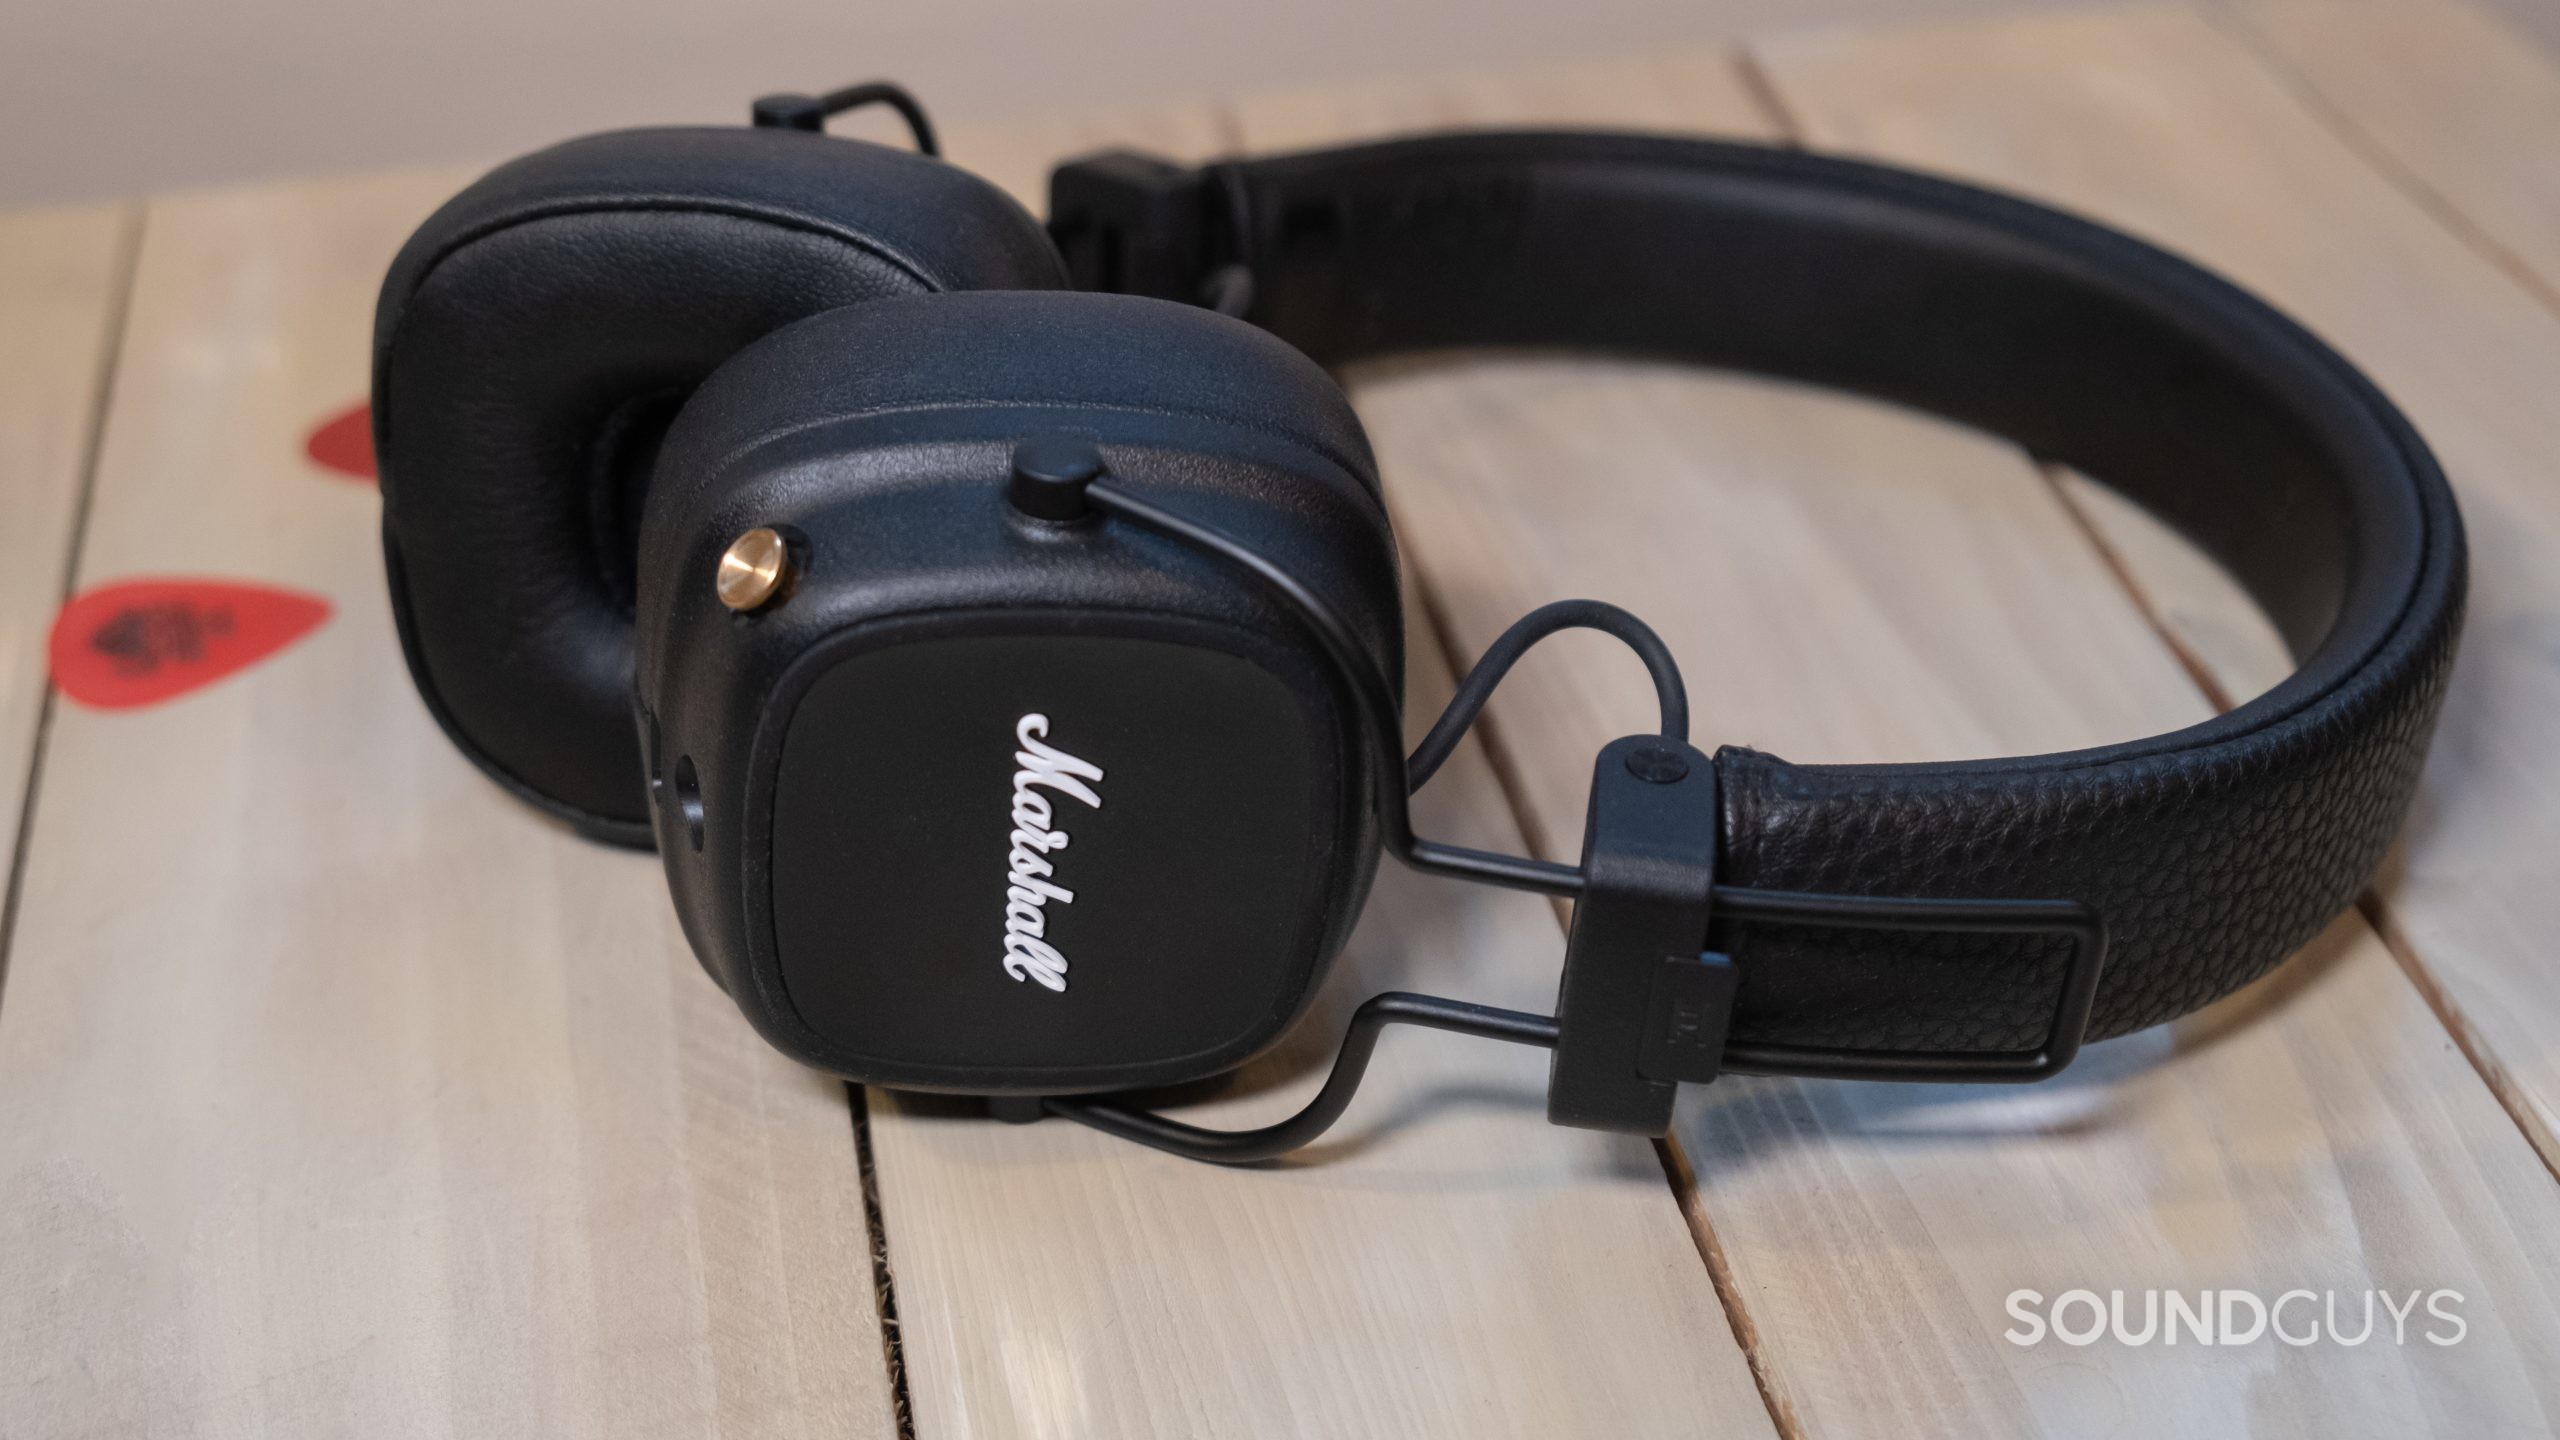 Marshall Major IV Bluetooth review - All About Mobile